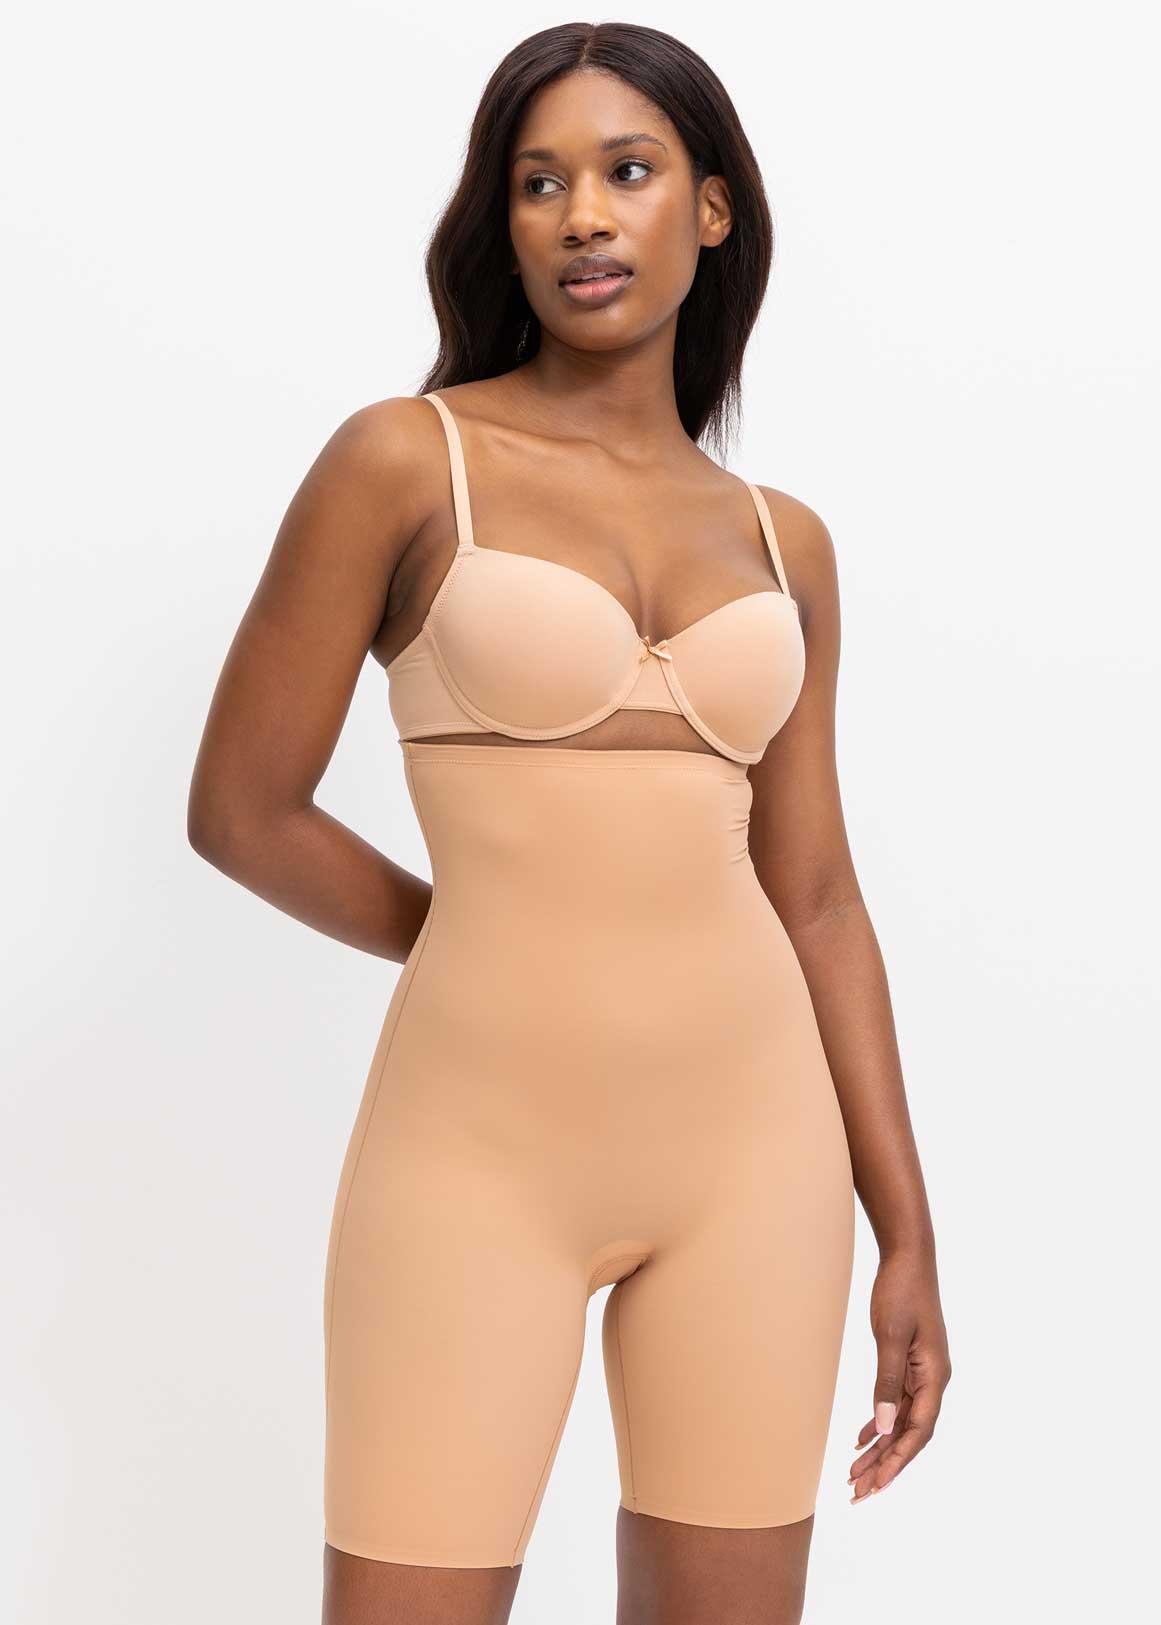 Invisible Body Shaper Review